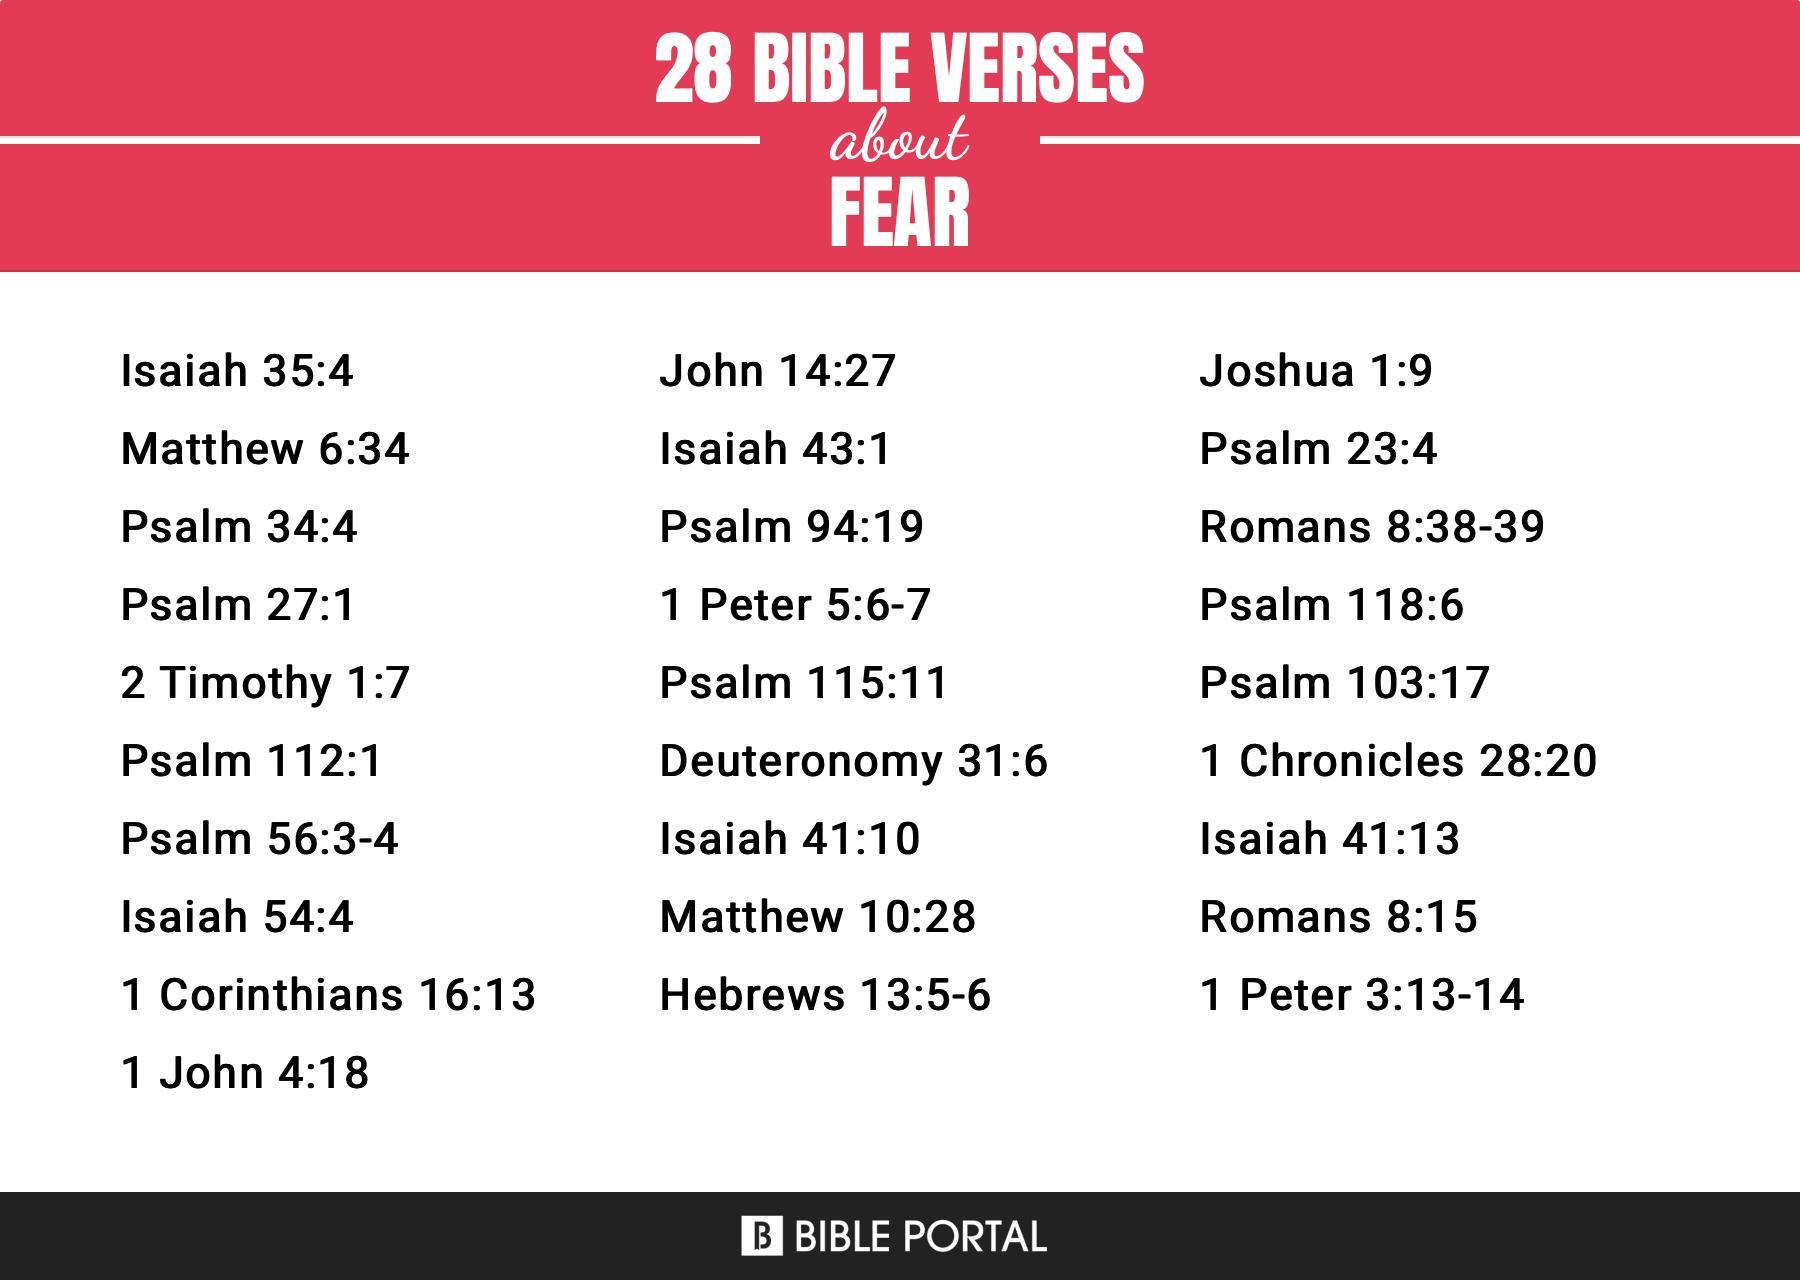 248 Bible Verses about Fear